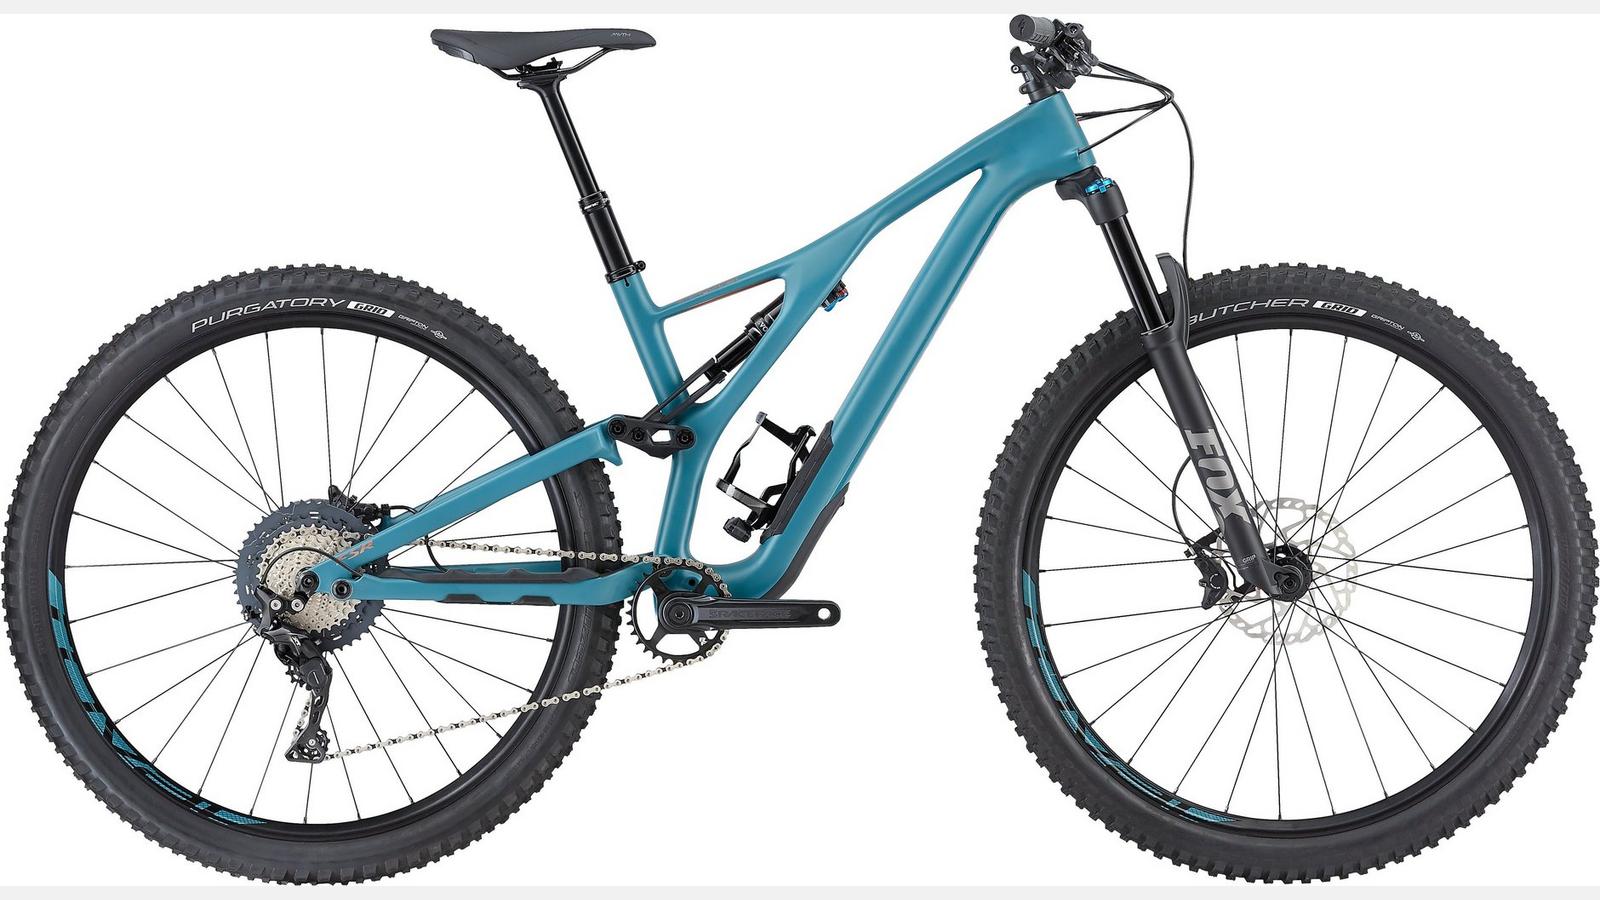 Paint for 2018 Specialized Women's Stumpjumper ST Comp Carbon 29 - Satin Dusty Turquoise